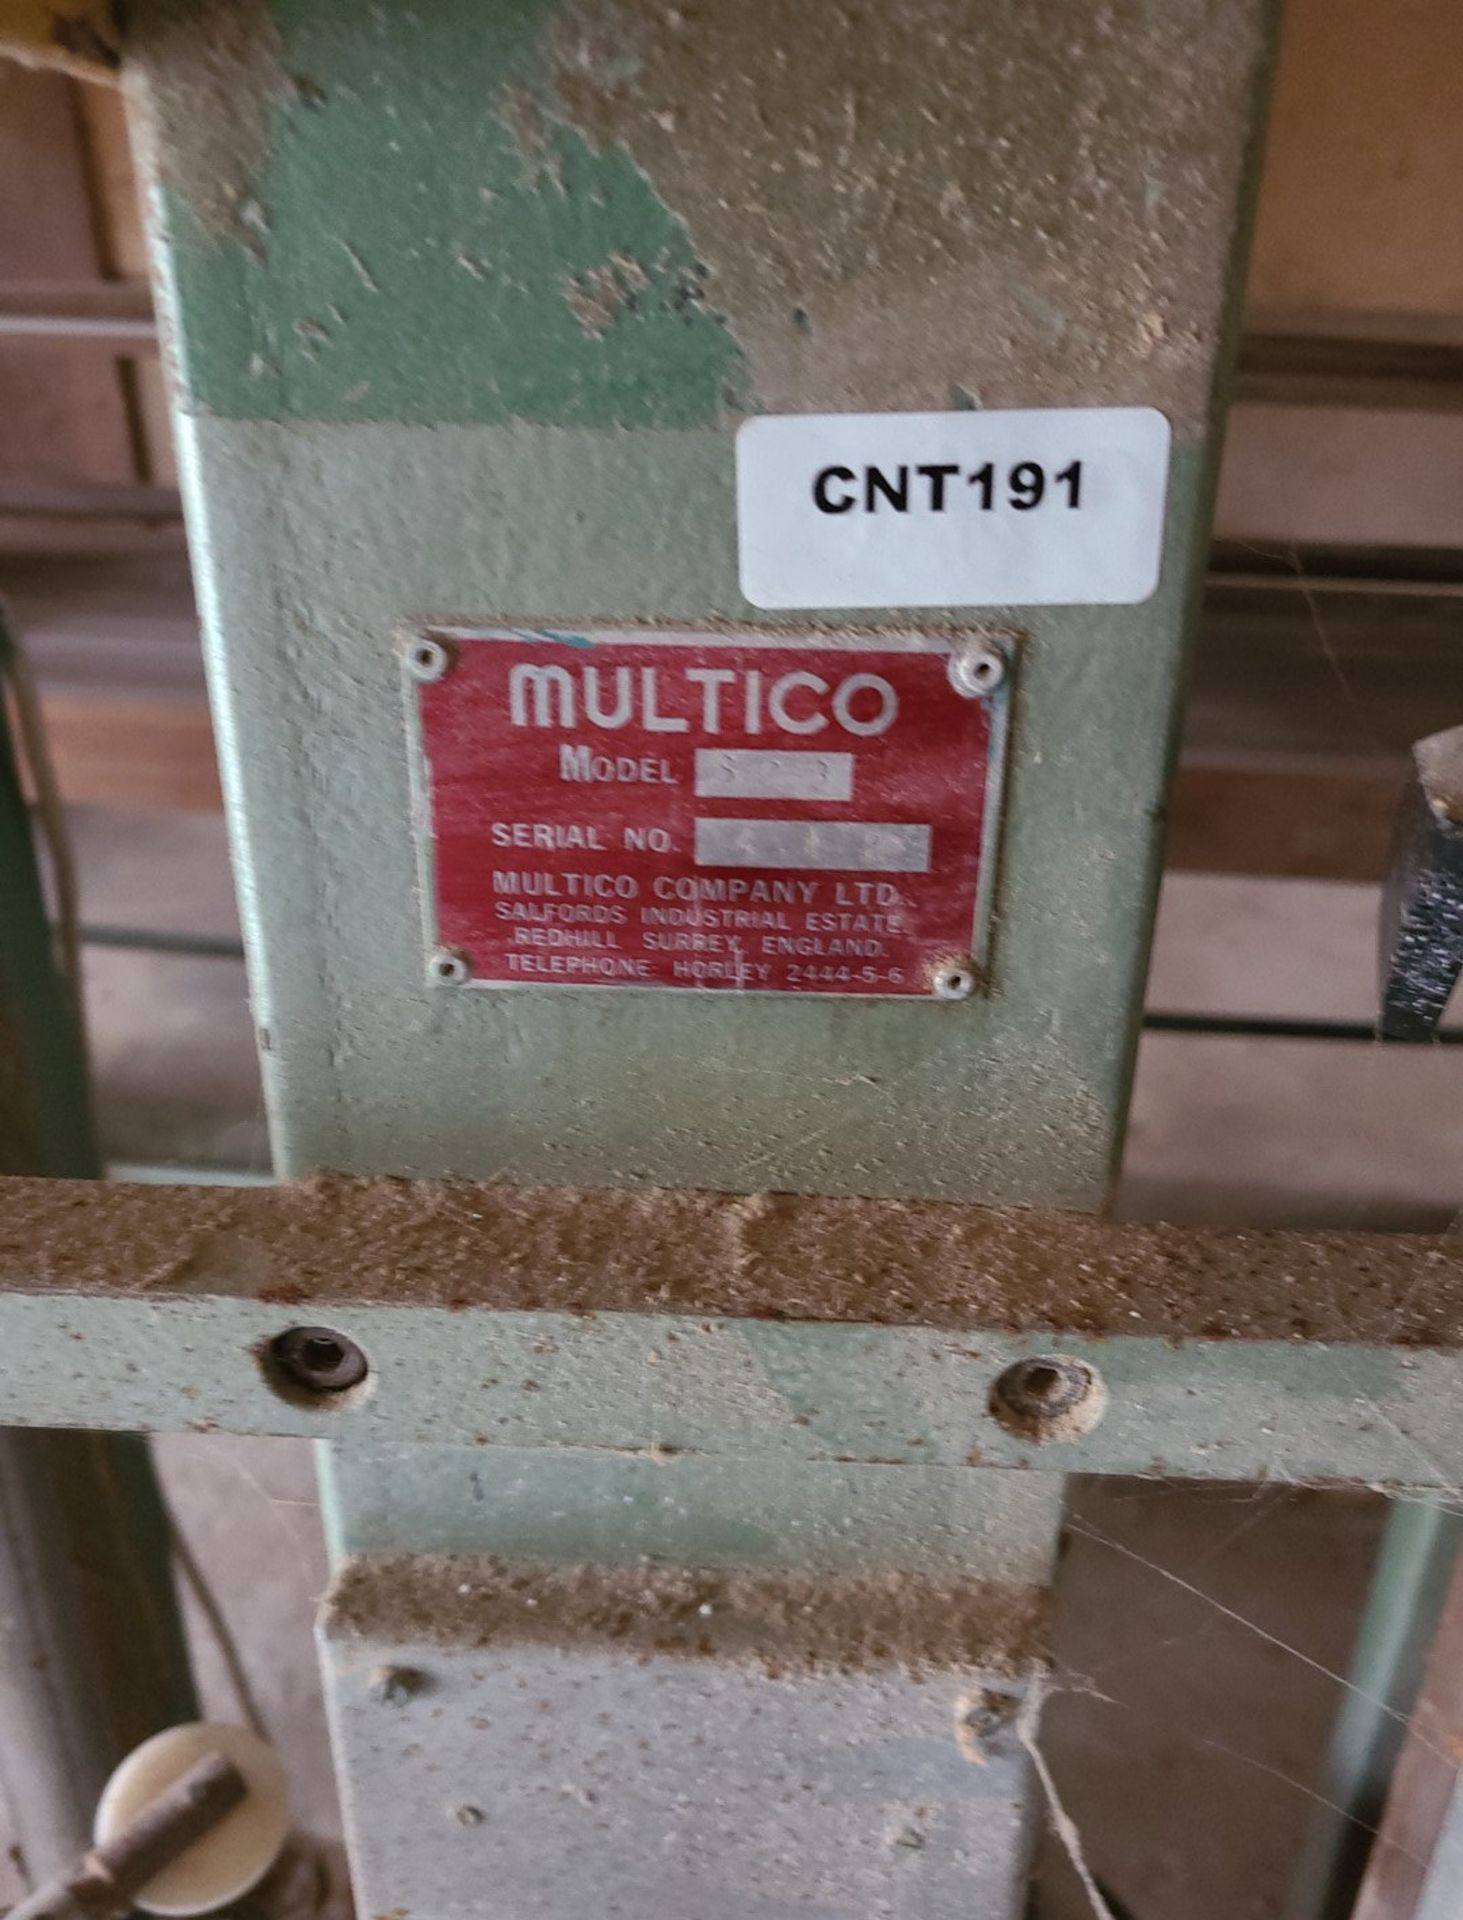 1 x Multico SC3 Wall Saw 2M X 2M X 1.8M - Ref: CNT191 - CL846 - Location: - Image 3 of 11